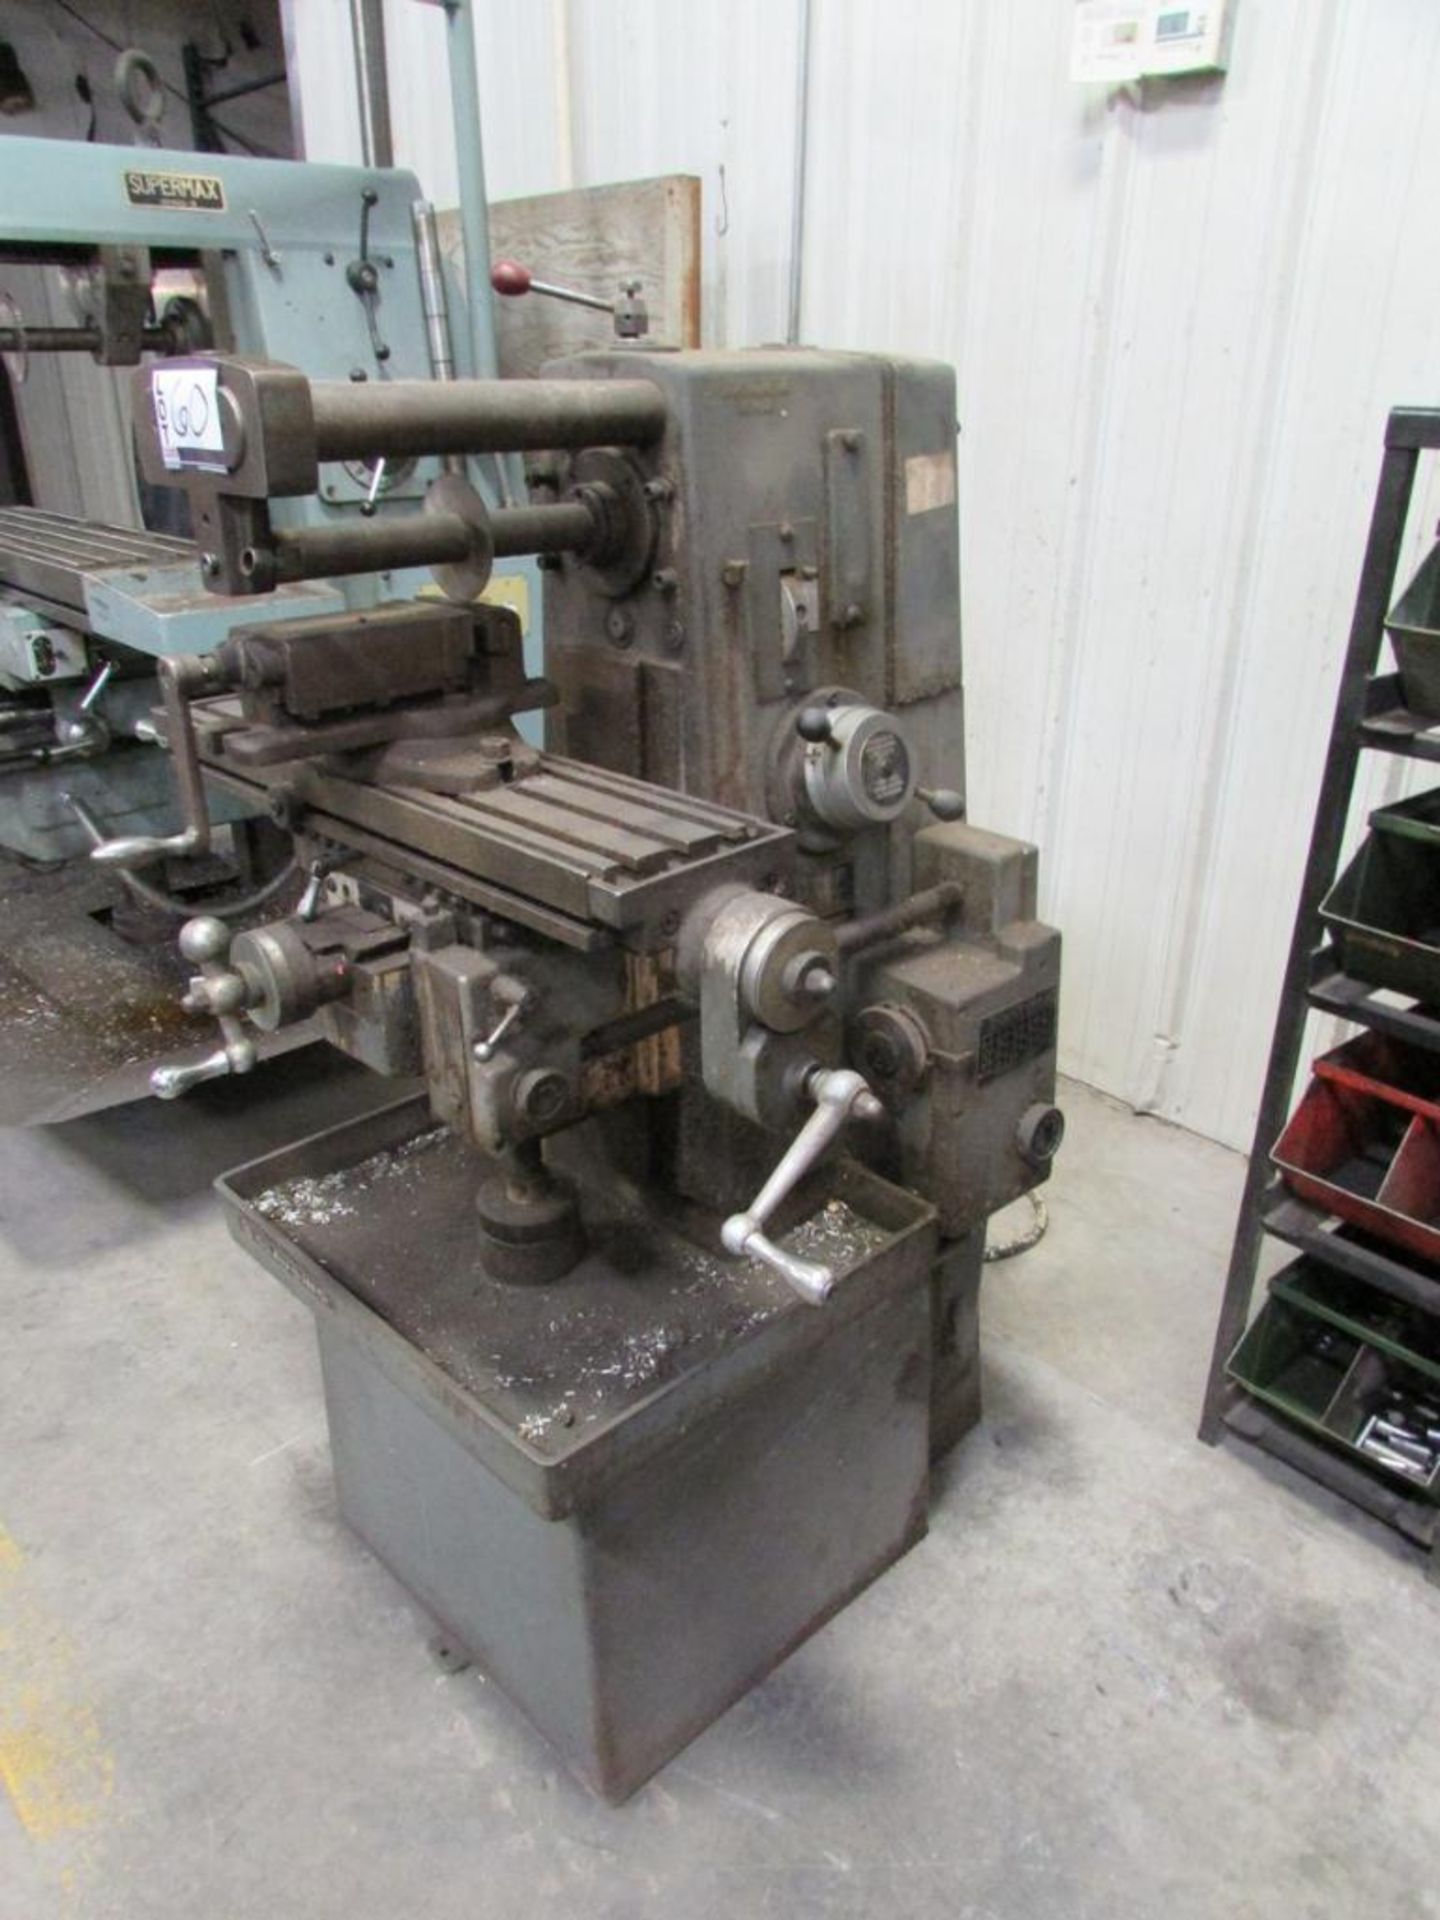 Clausing 8540 Horizontal Mill, 26" x 6.75" Table, Table Power Feed with Variable Feed Control, 4.25: - Image 5 of 7